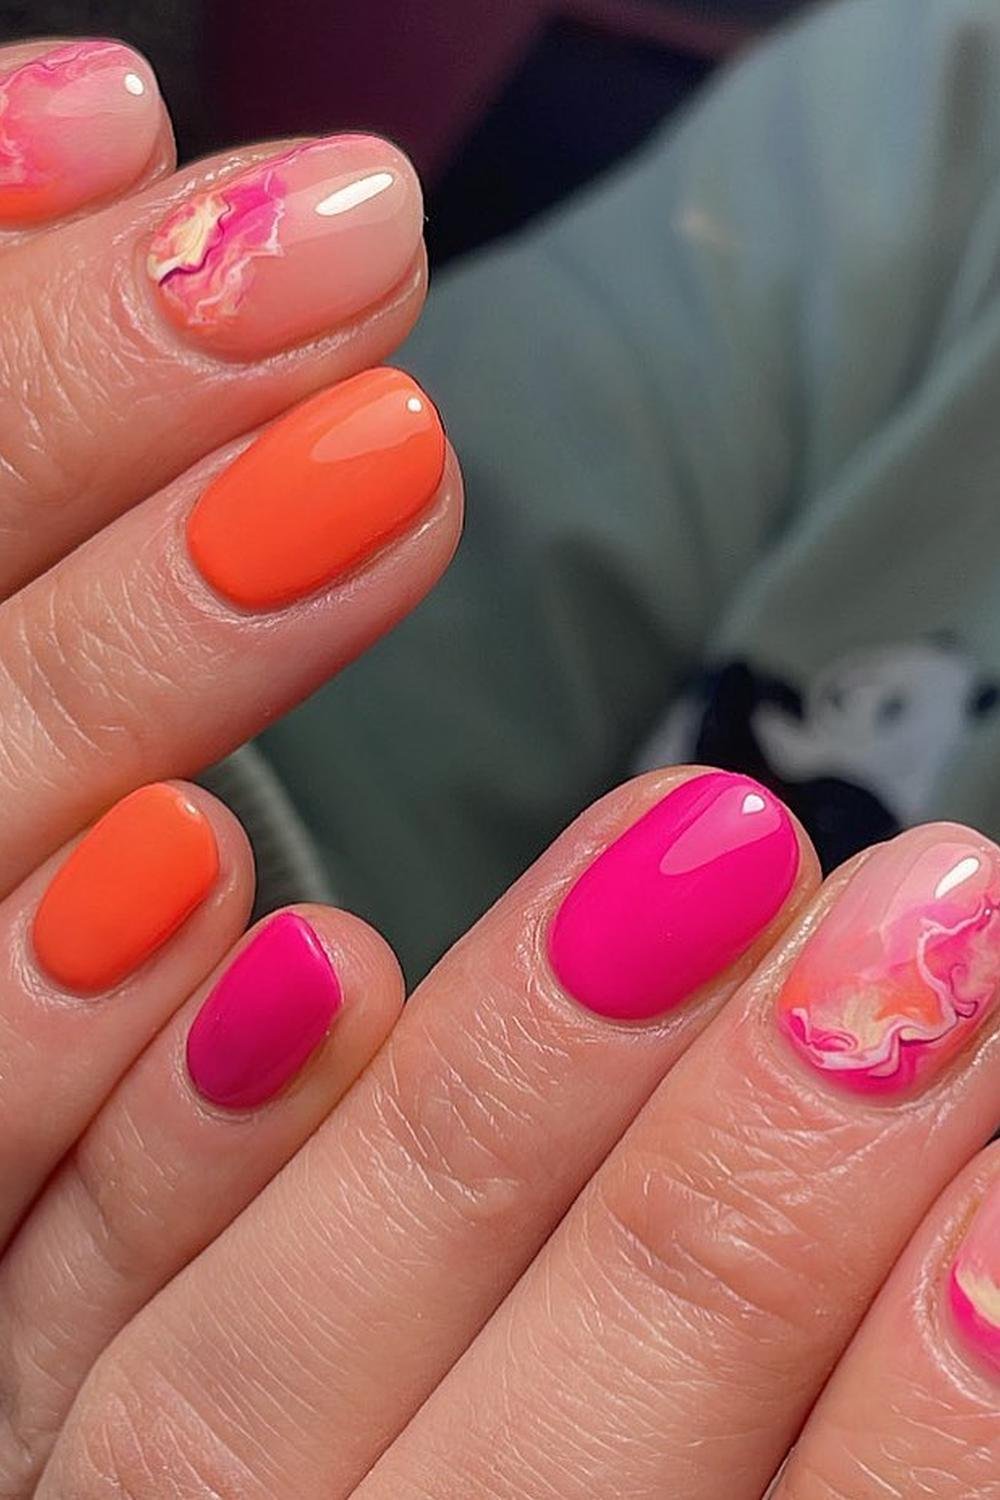 33 - Picture of Pink and Orange Nails